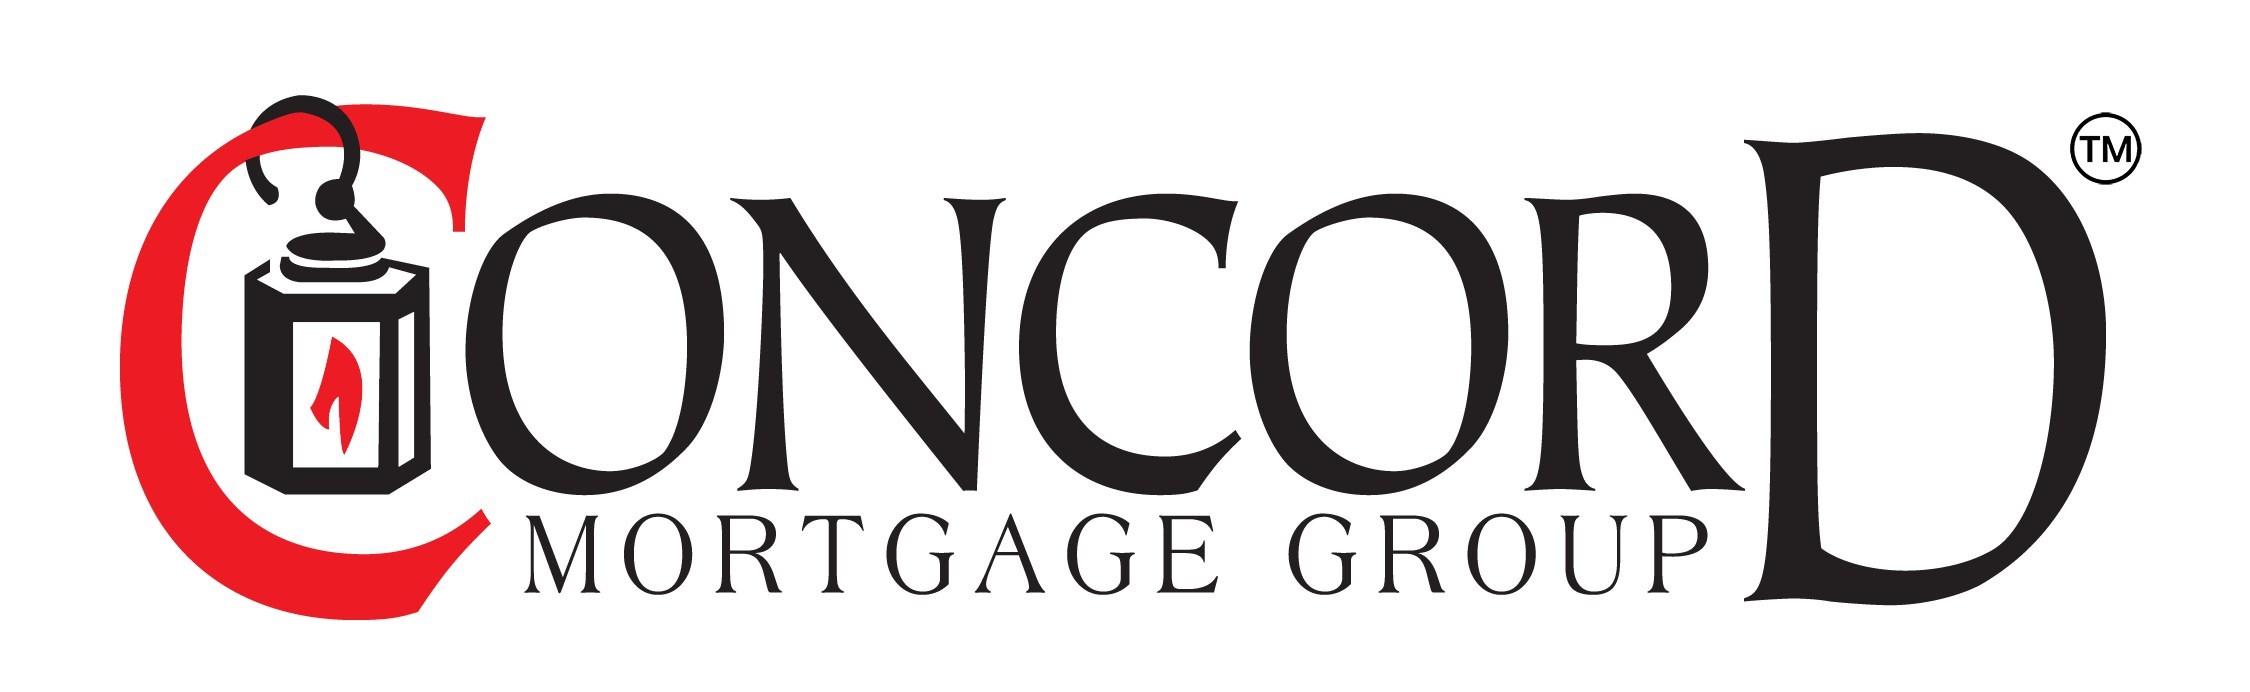 Concord Mortgage Group Deploys Blend to Drive Customer Delight, Efficiency